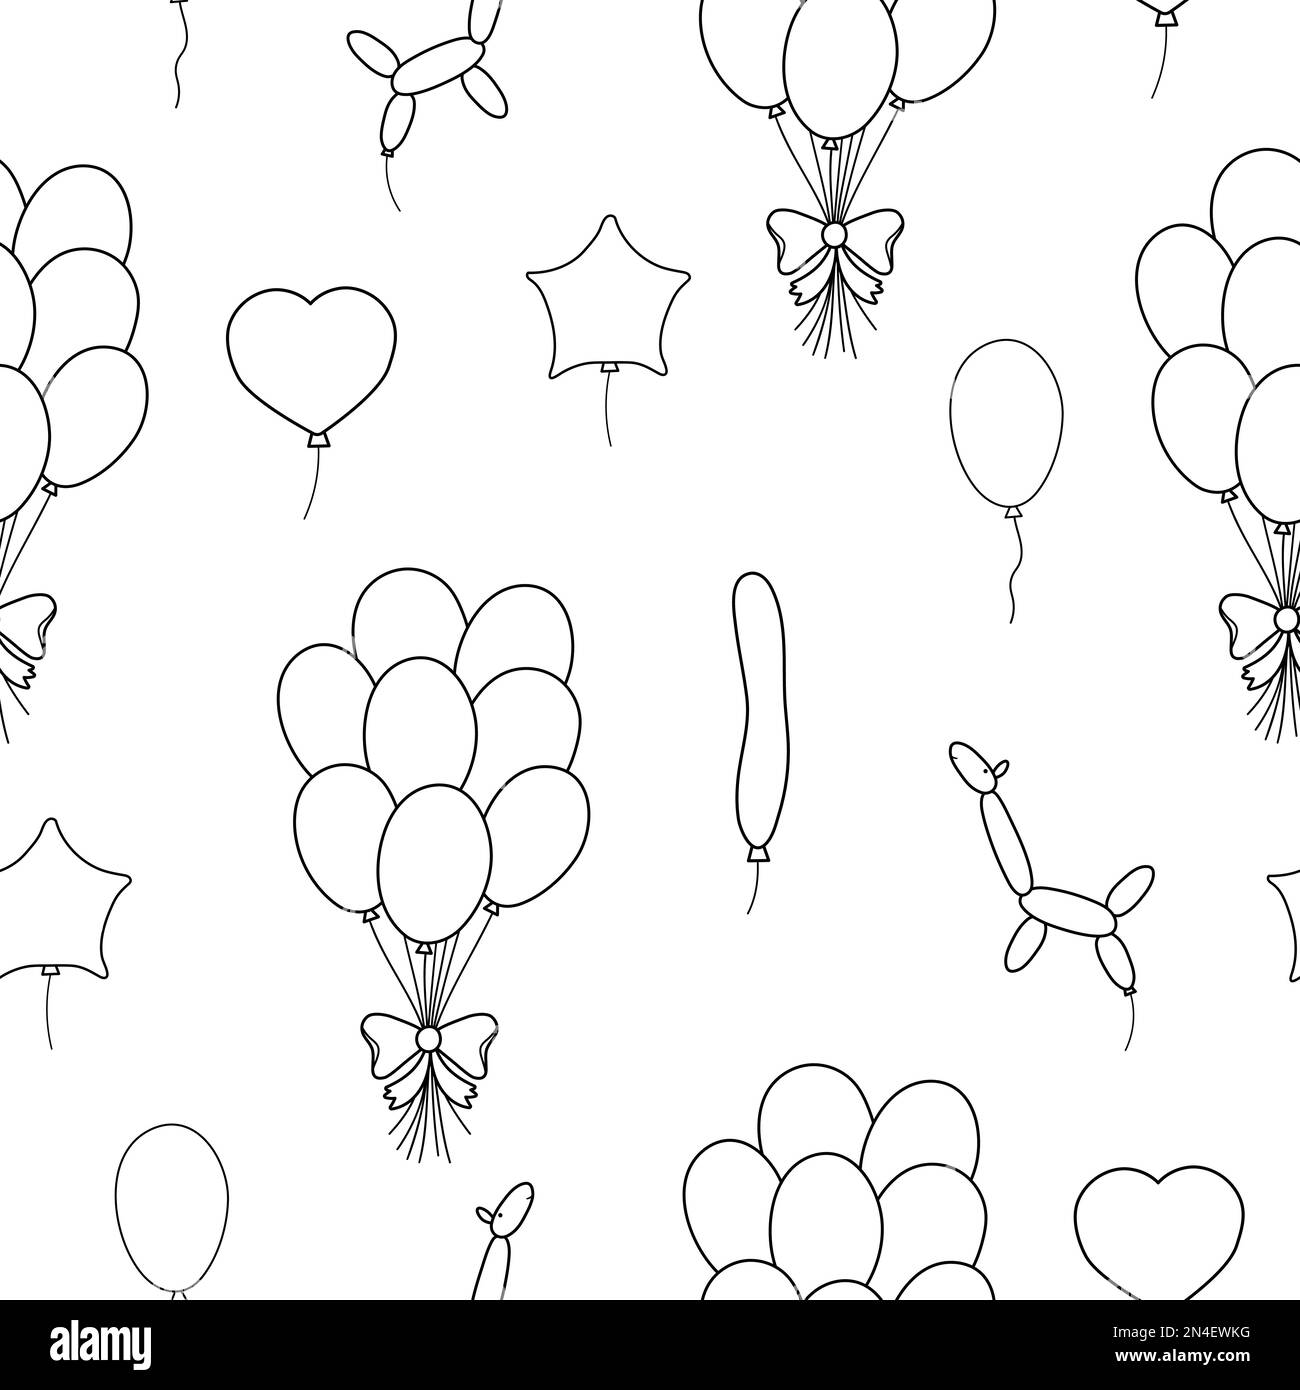 Vector black and white seamless pattern with cute balloons. Funny repeating background with birthday presents. Line holiday digital paper for kids. Ch Stock Vector